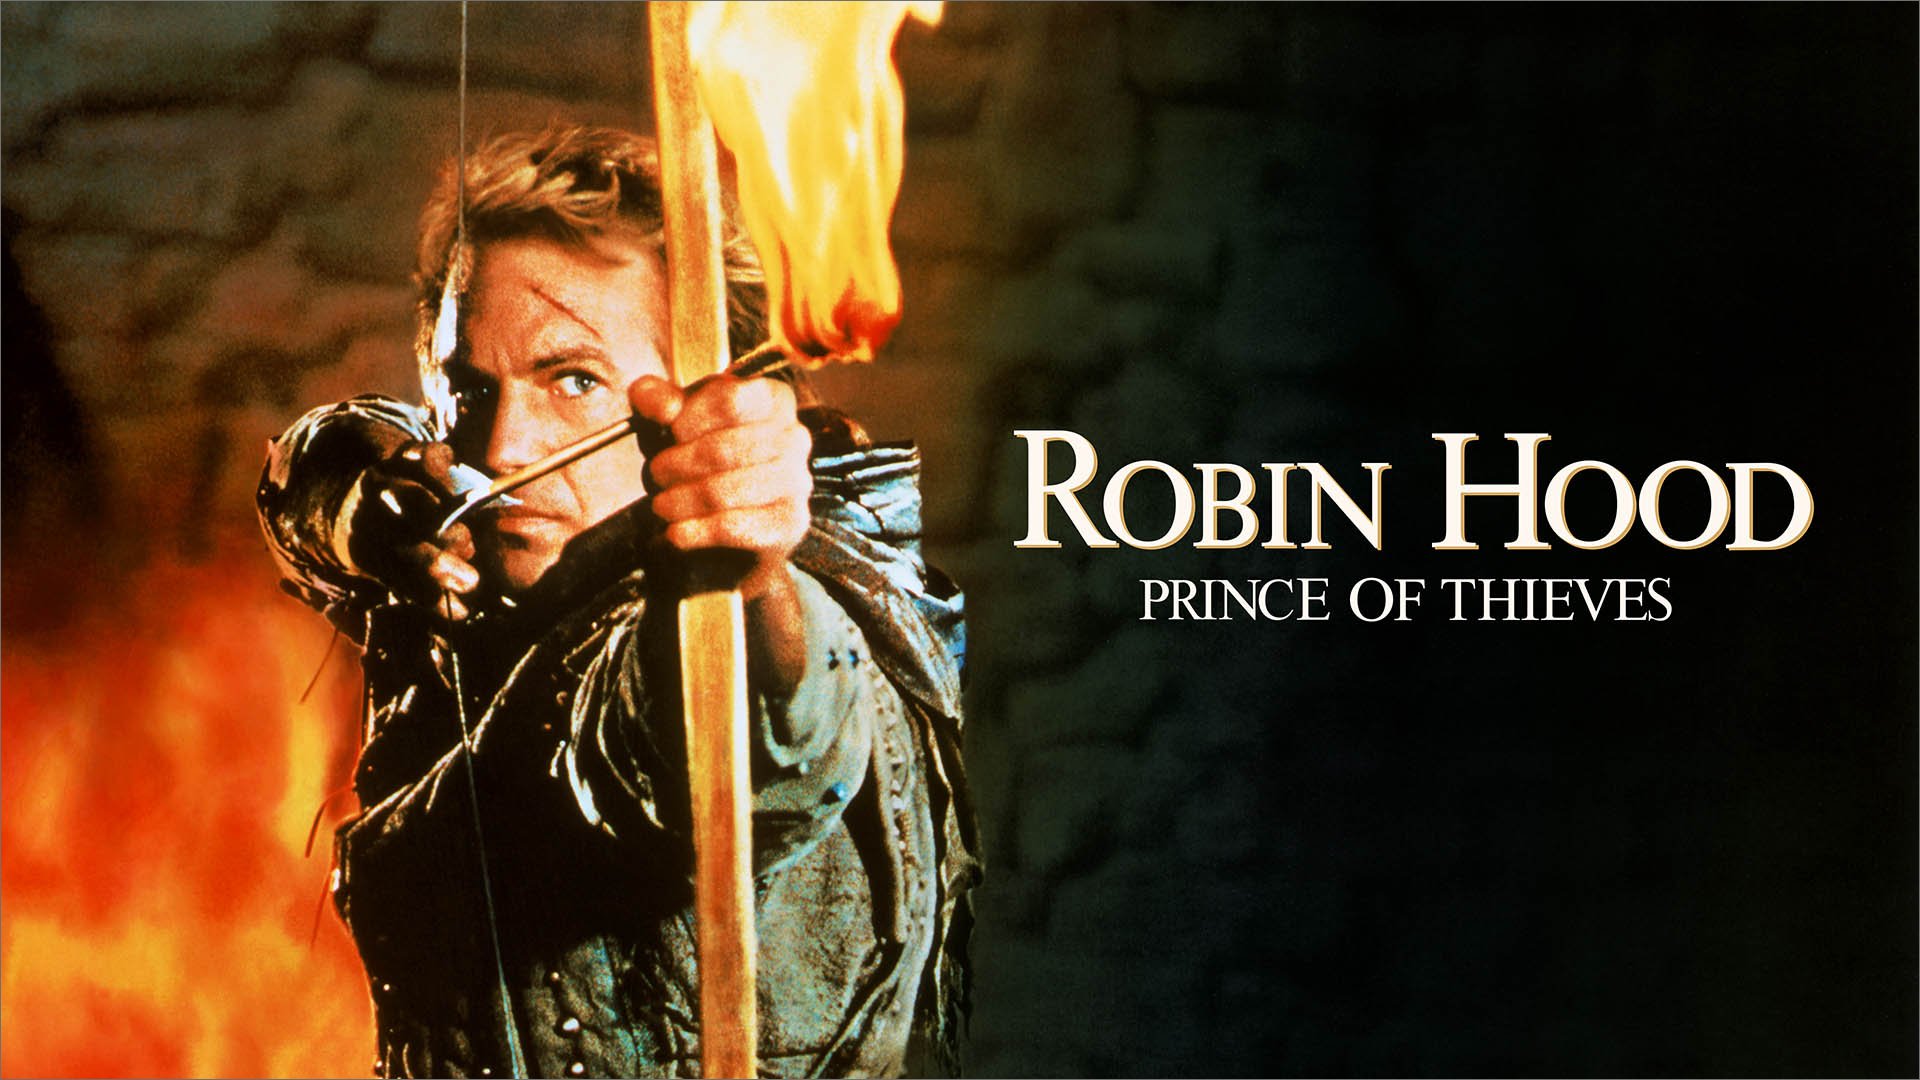 Watch Robin Hood: Prince of Thieves Online | Stream Full Movies